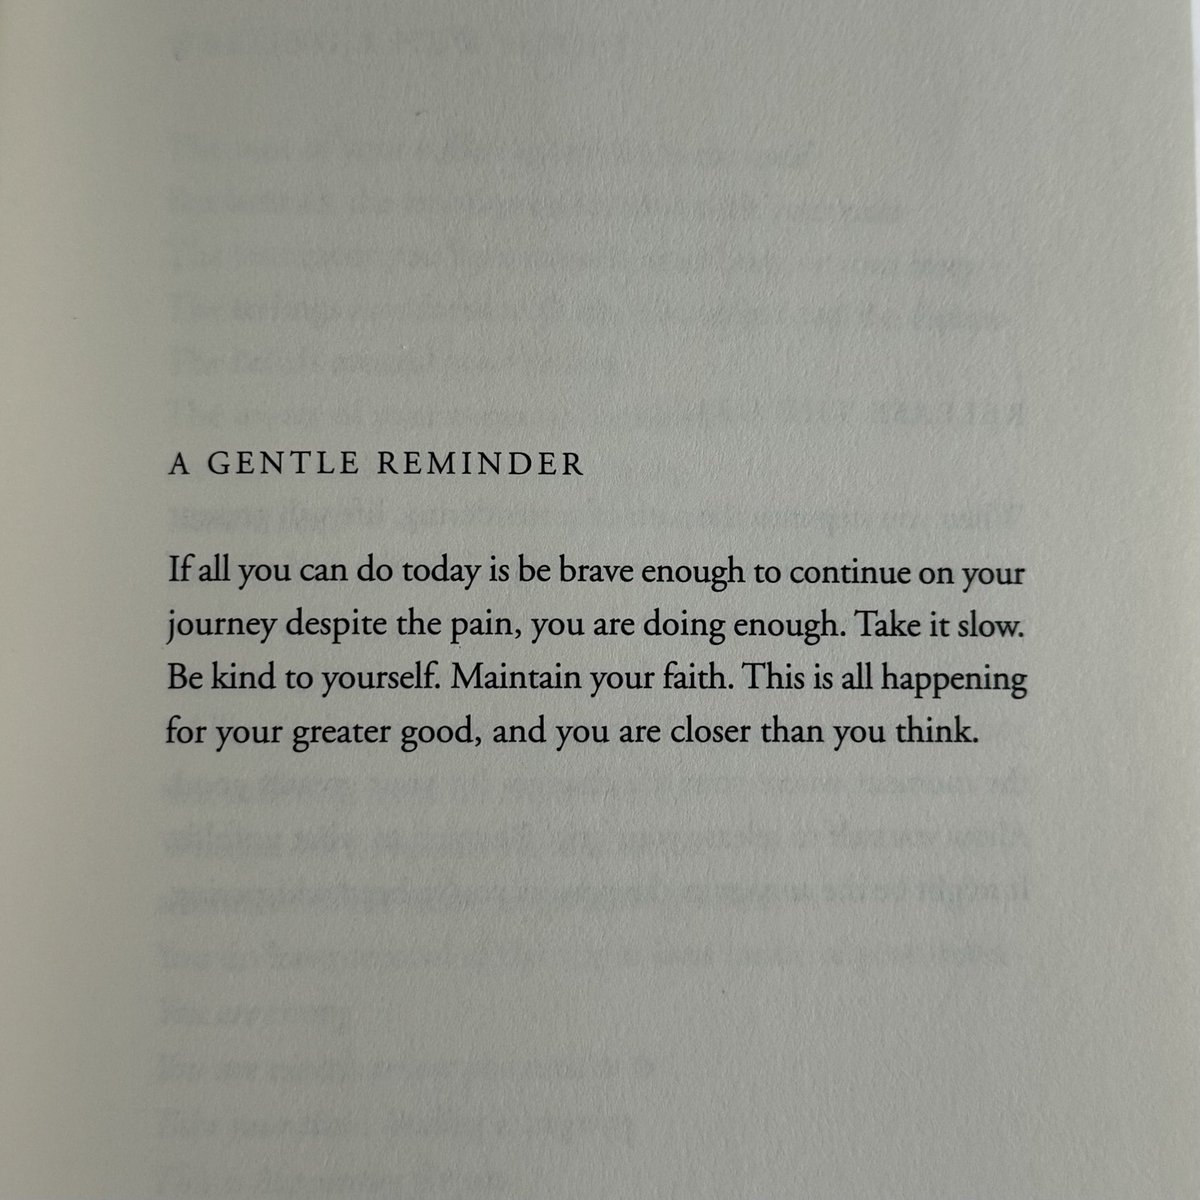 You are doing enough ❤️

Book: Beauty In The Stillness by Karin Hadadan